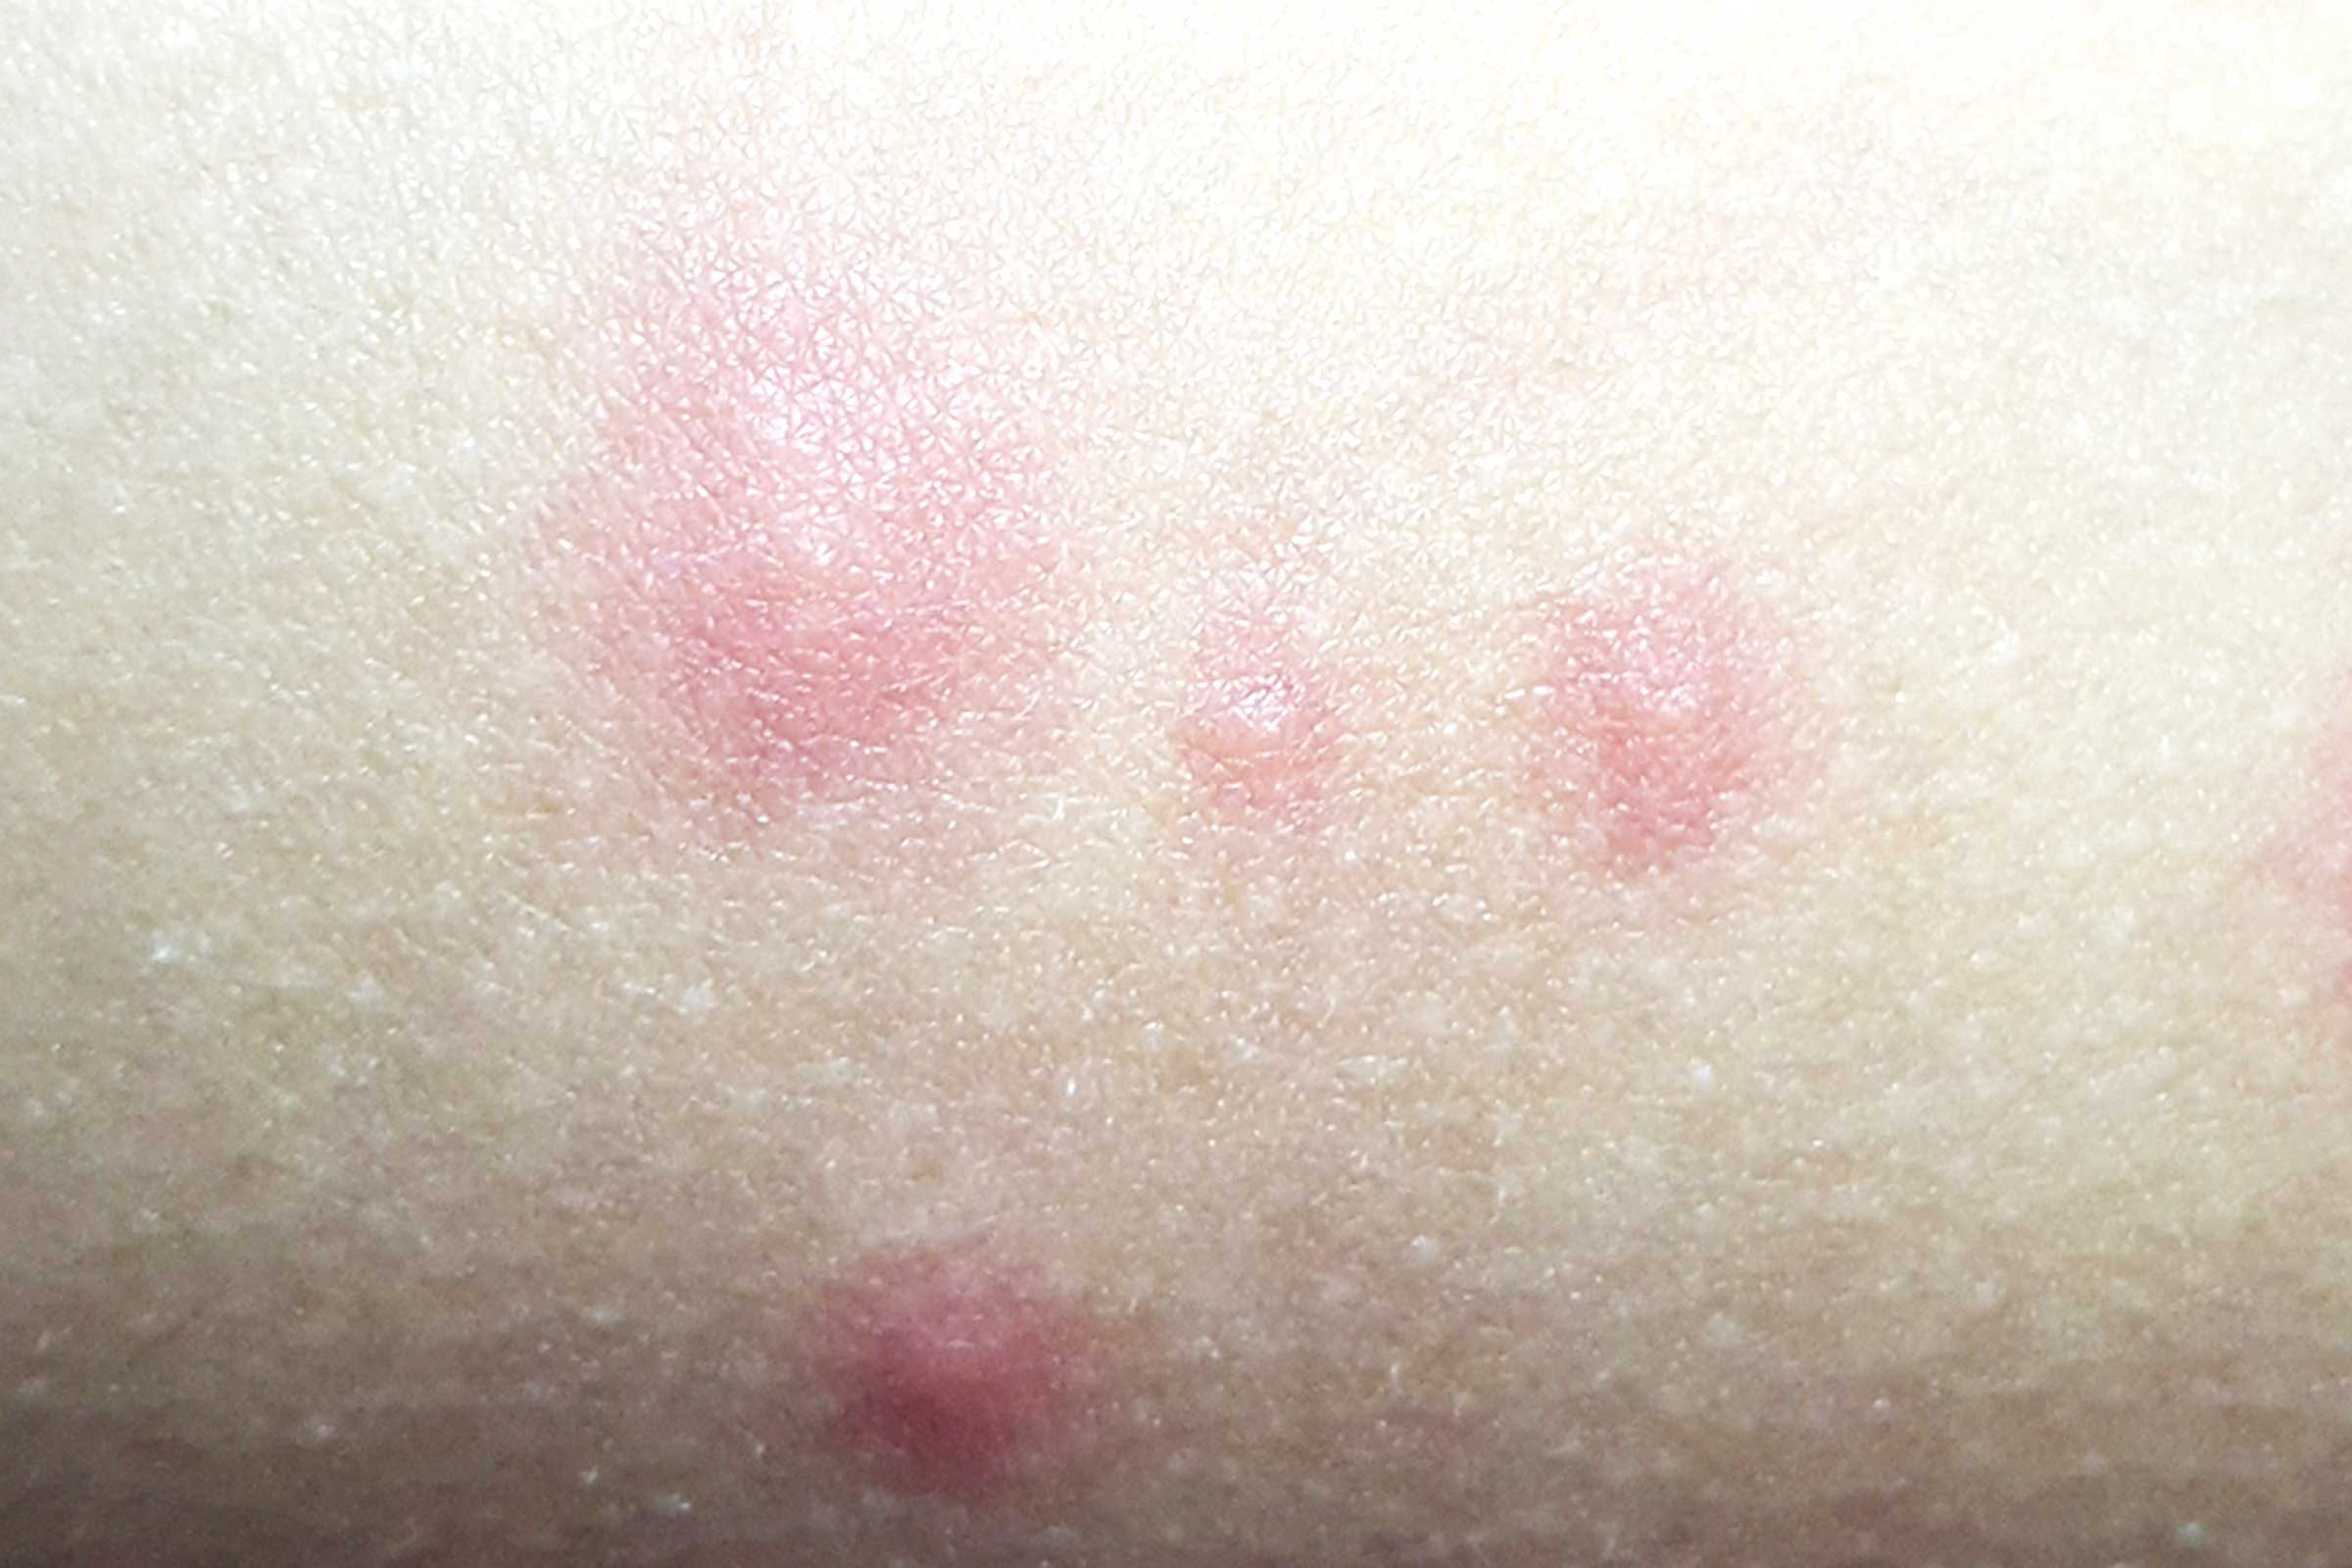 how to identify chigger bites on human skin